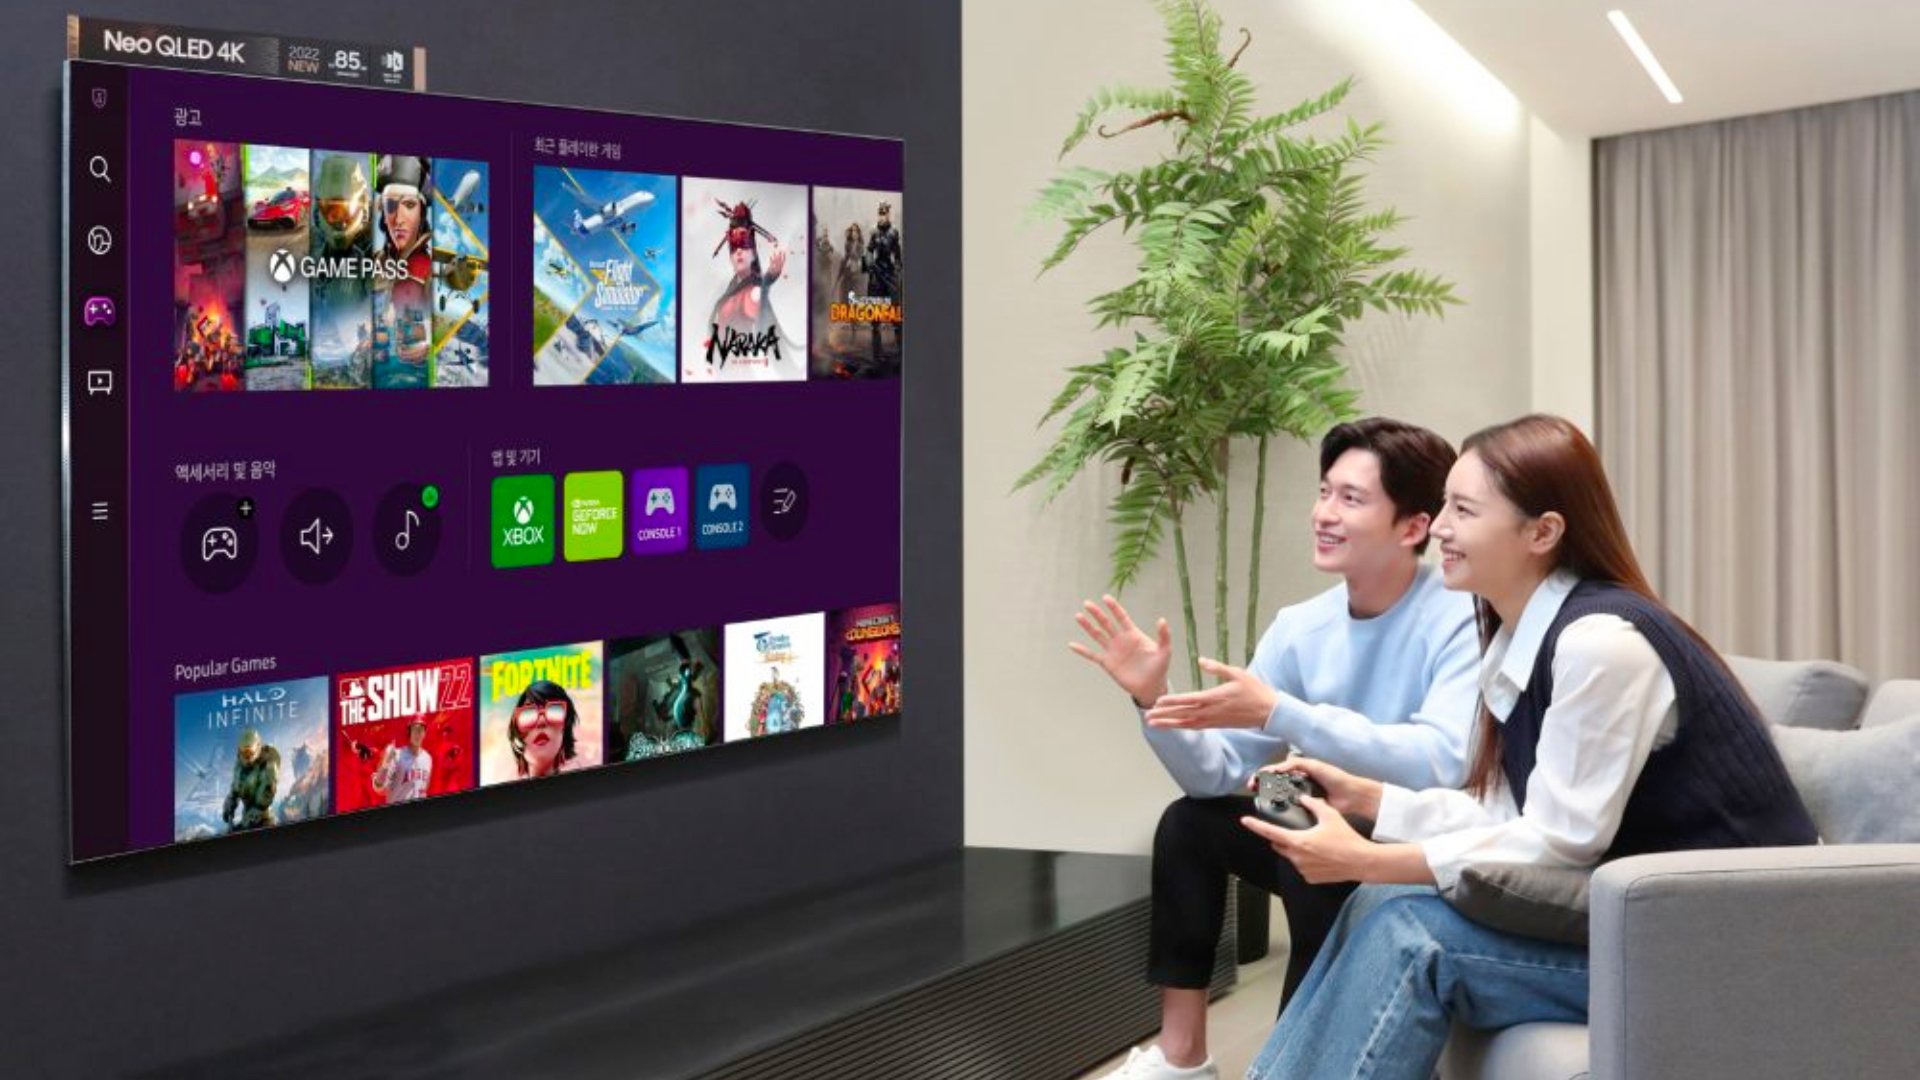 Xbox Game Pass Is Coming to Samsung TVs This Month: Save on a 3